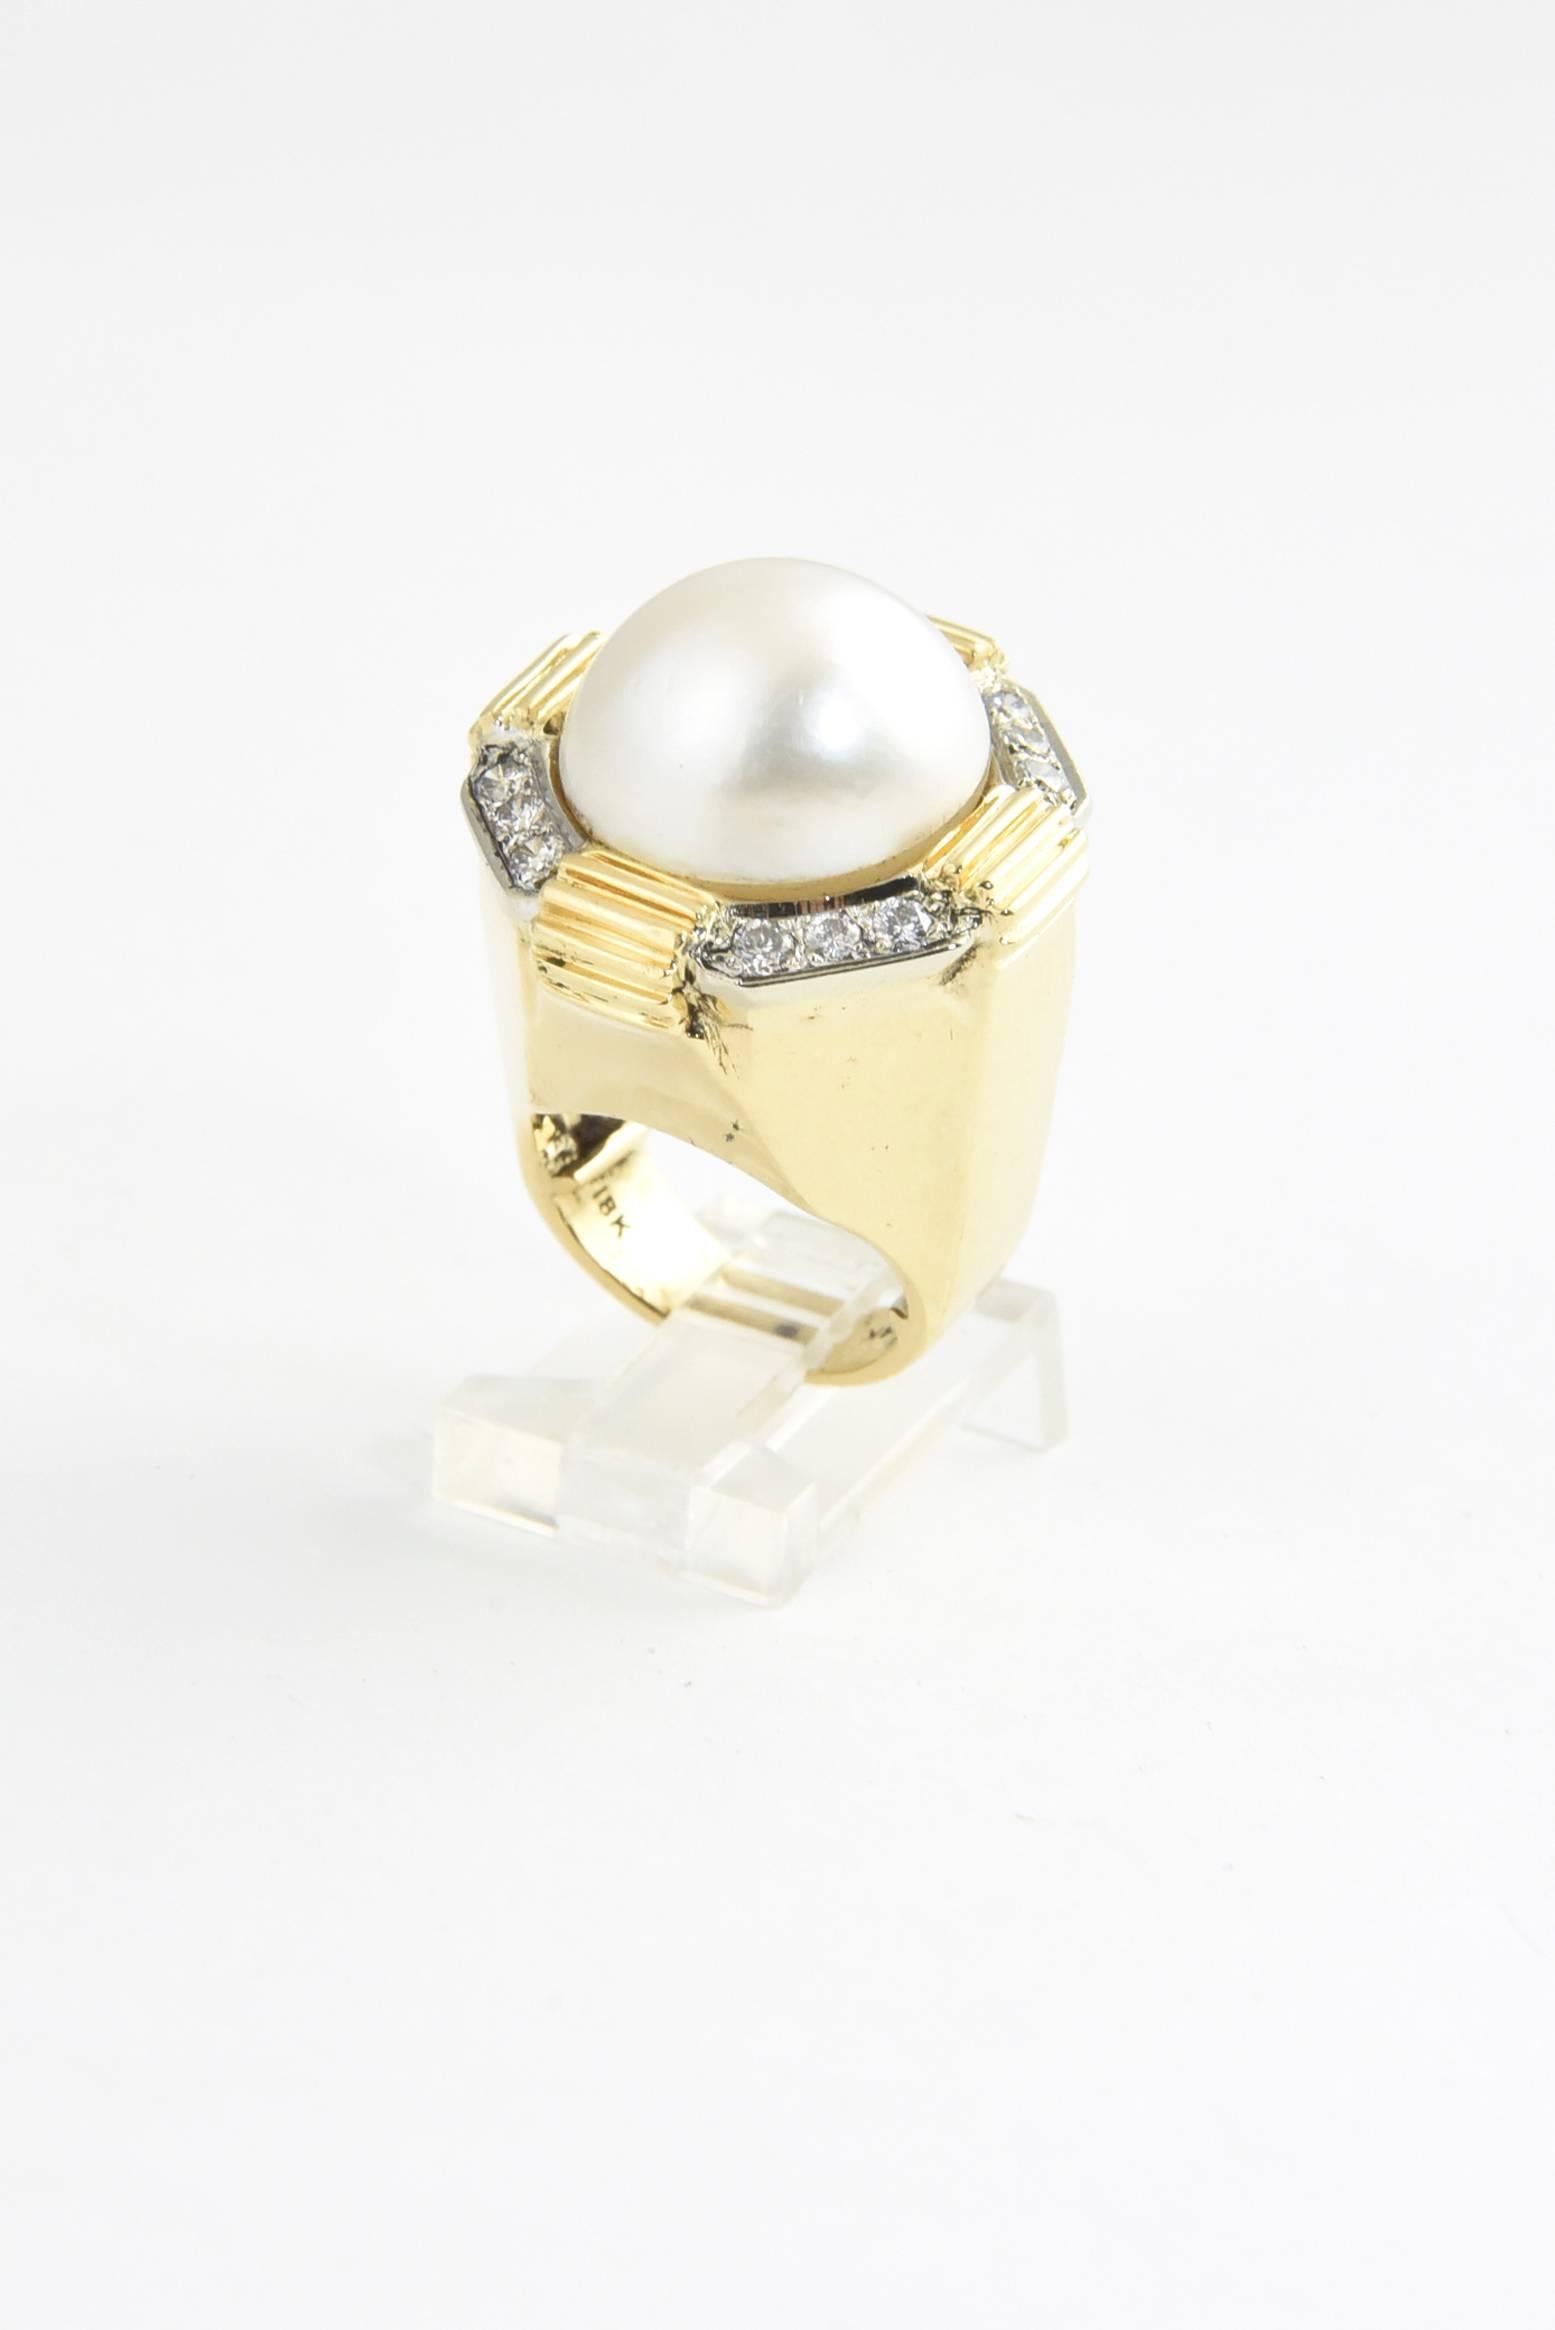 Women's 1980s Geometric Mabe Pearl Diamond Gold Earrings and Ring Suite